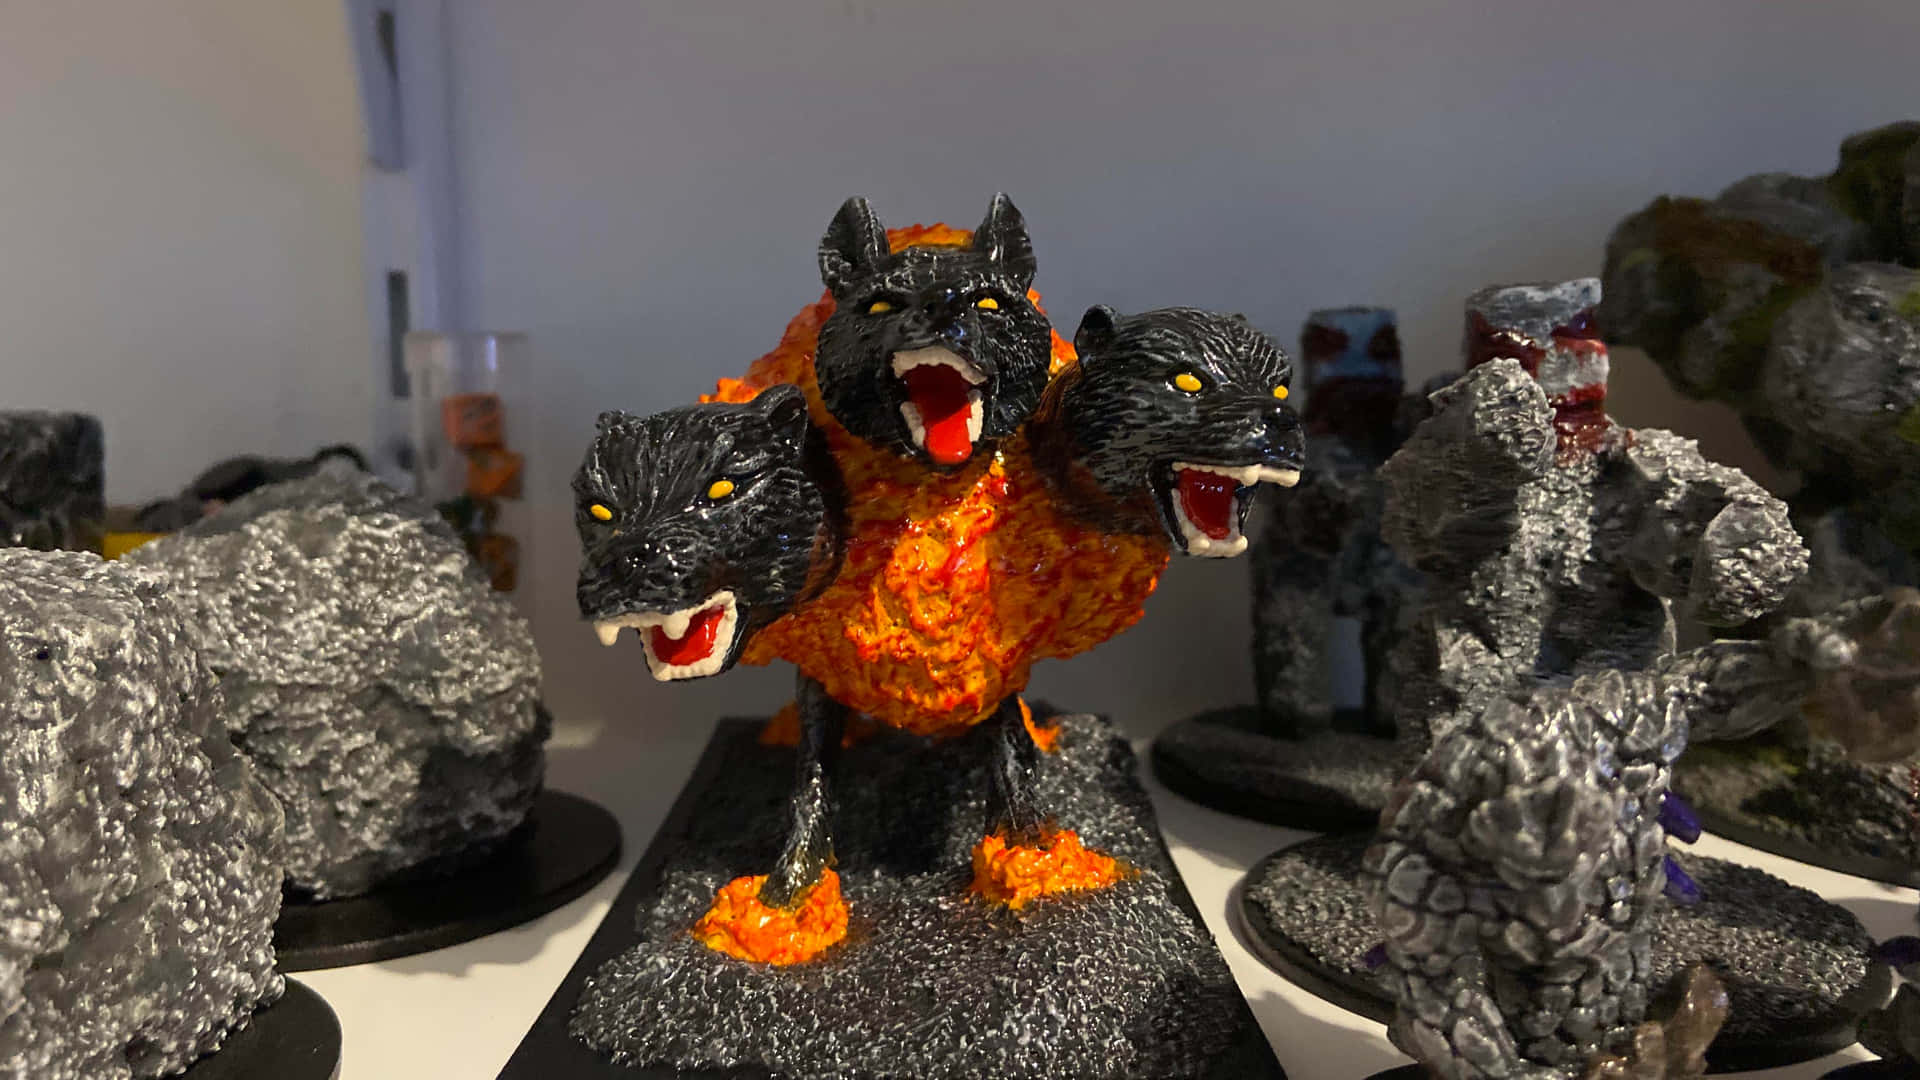 A Display Of Figurines With Fire And Flames